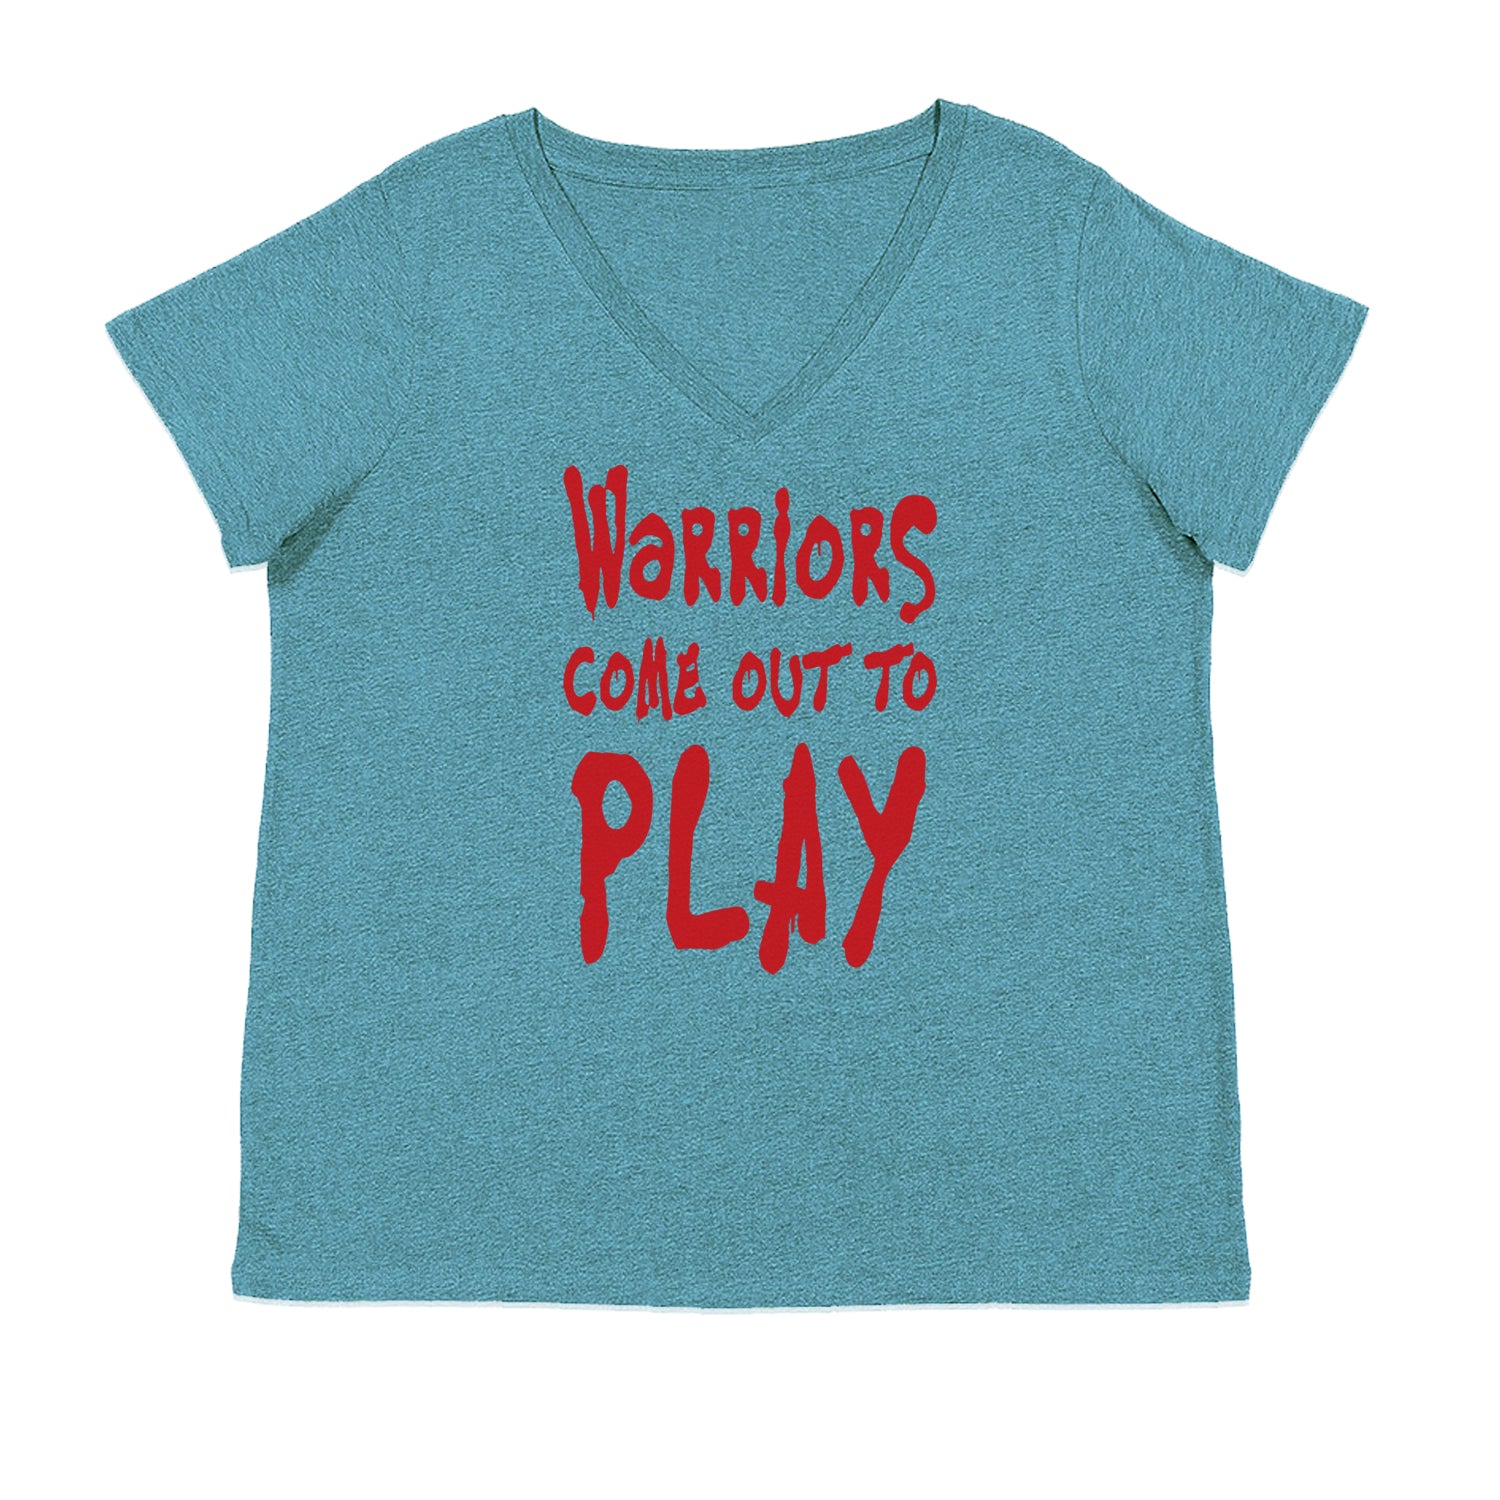 Warriors Come Out To Play  Ladies V-Neck T-shirt Surf